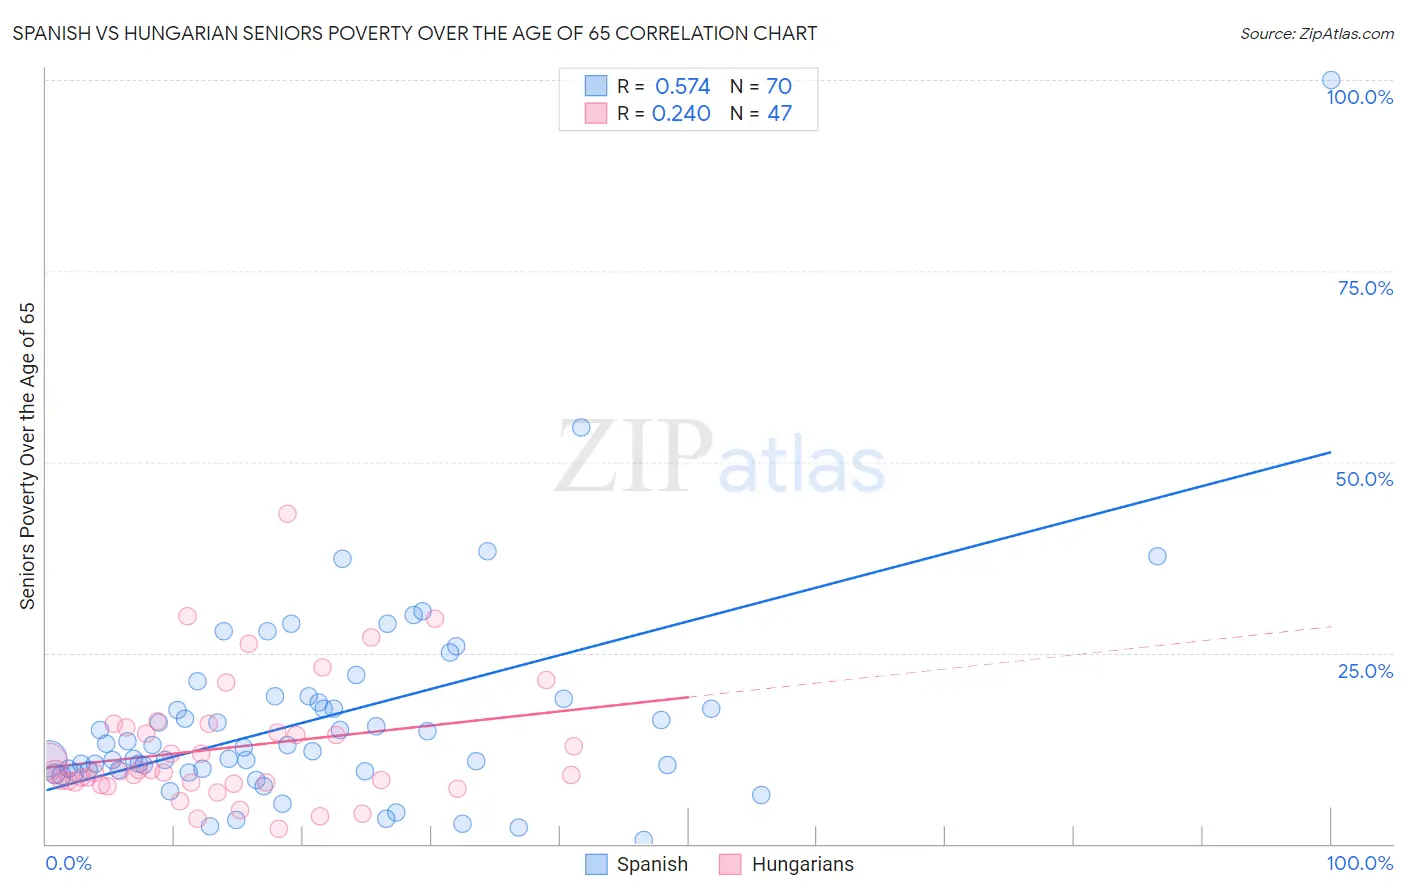 Spanish vs Hungarian Seniors Poverty Over the Age of 65